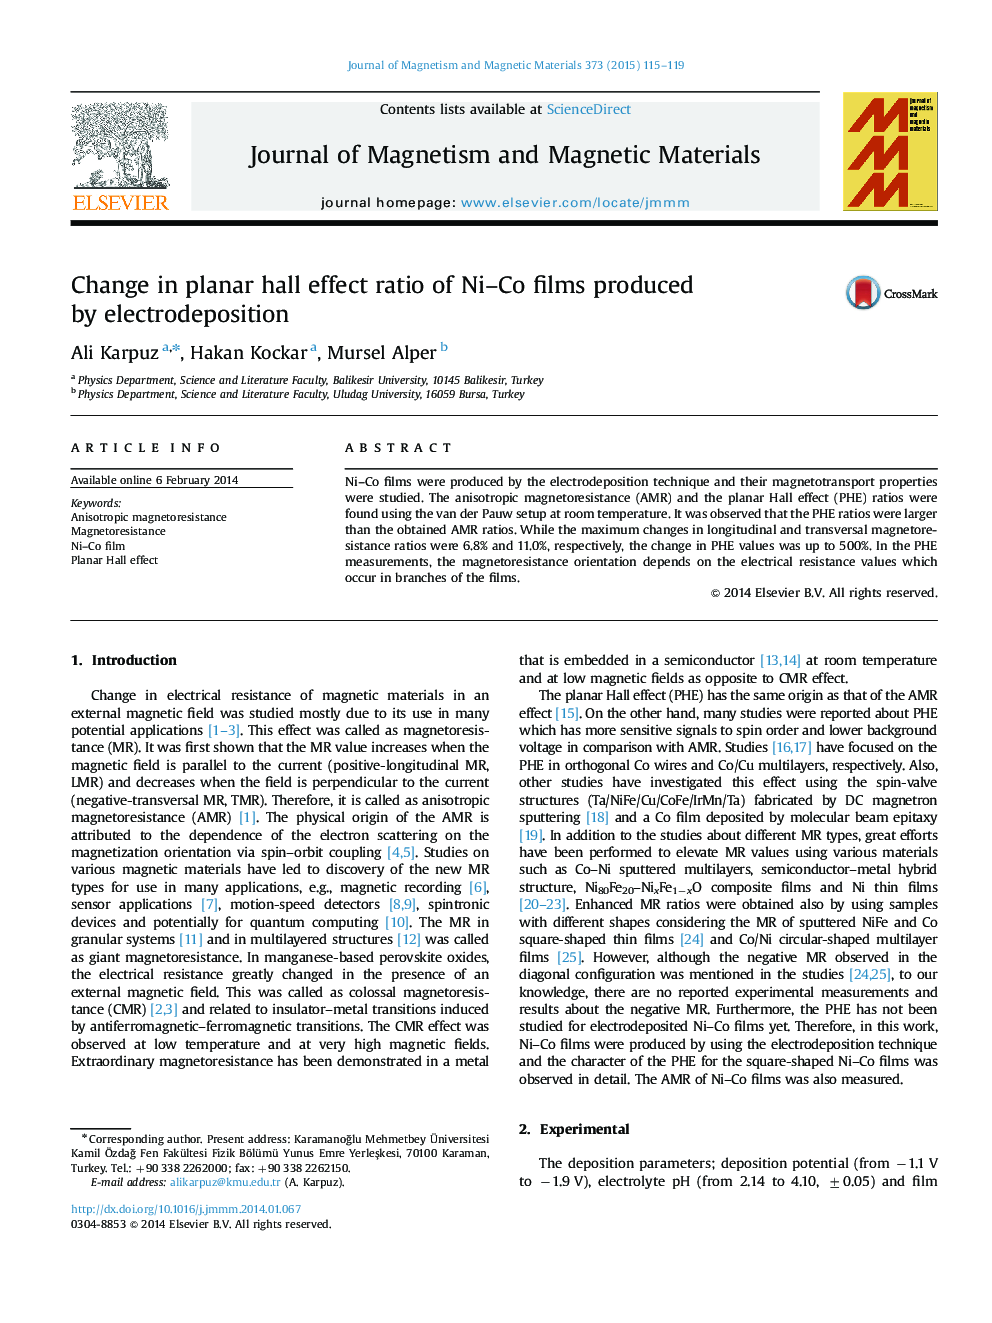 Change in planar hall effect ratio of Ni–Co films produced by electrodeposition